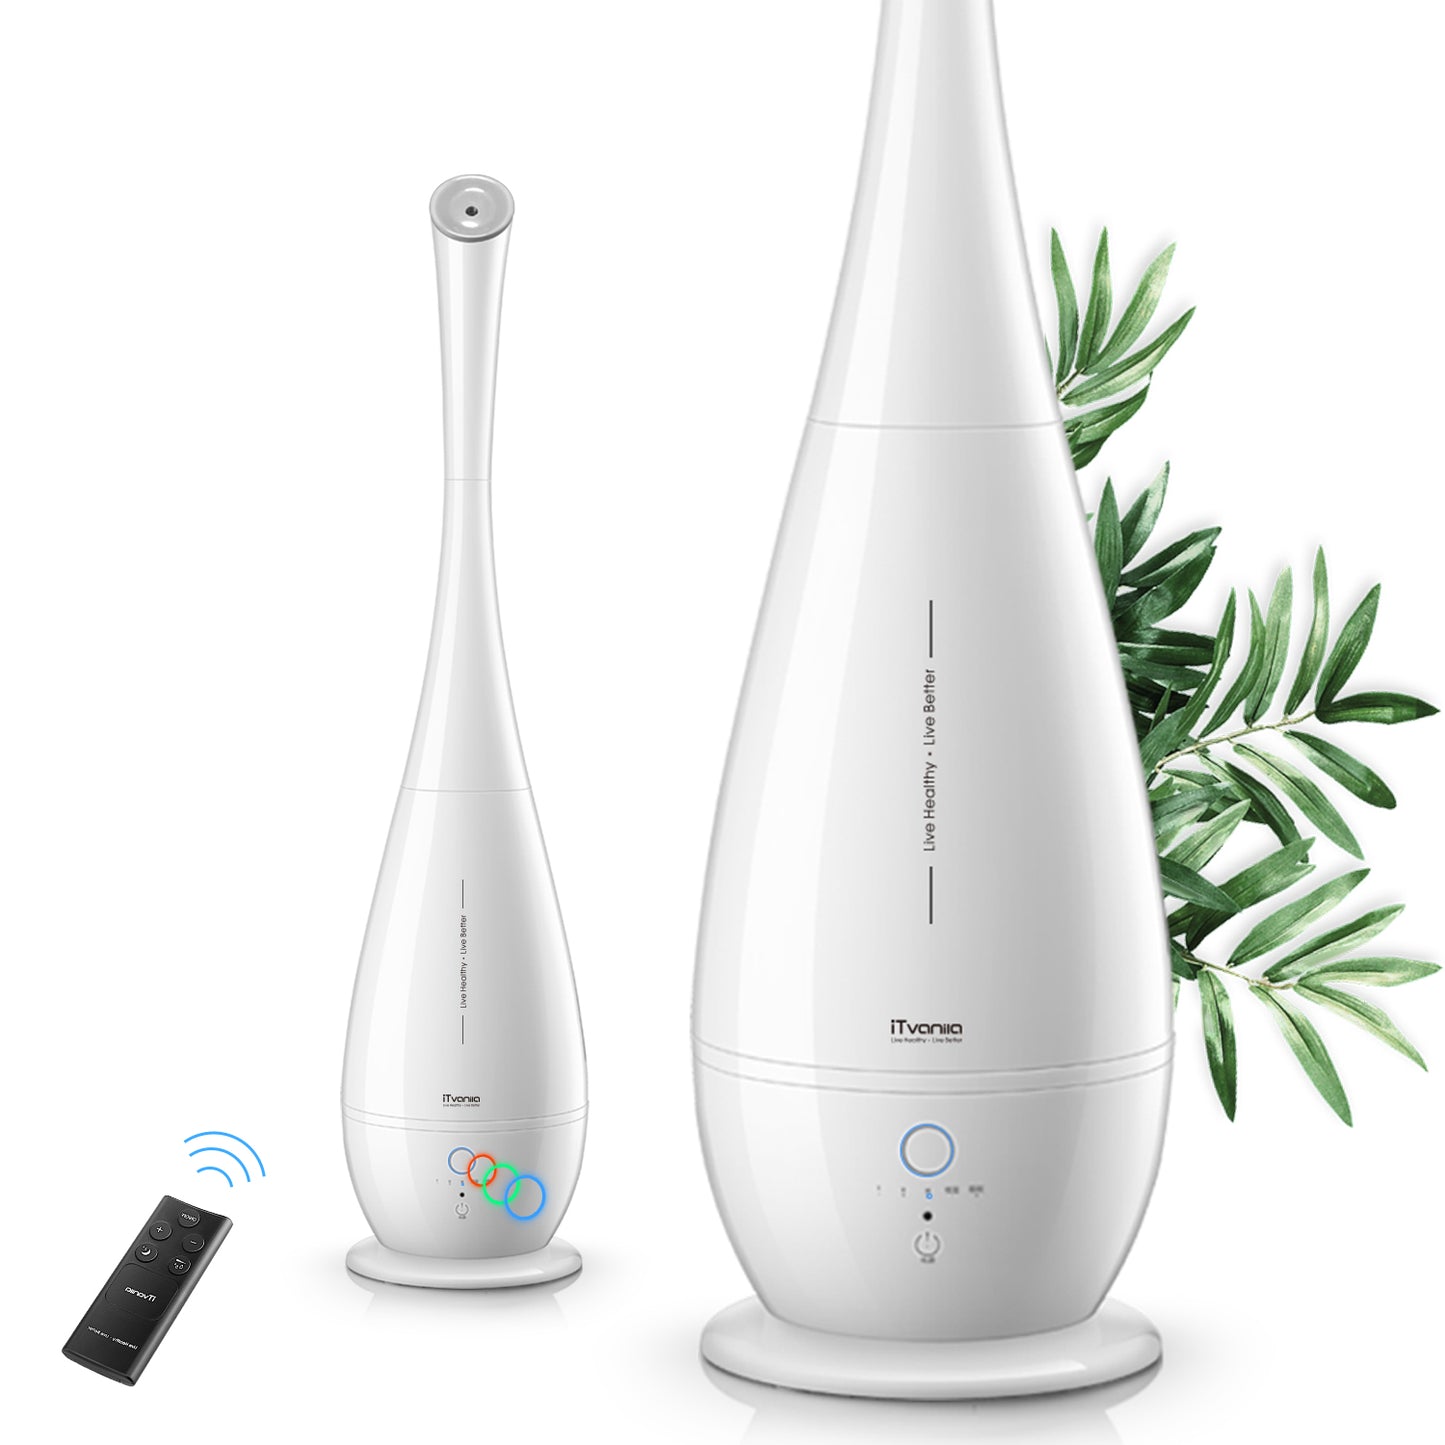 Smart Cool Mist Humidifiers, Large Room Use, 5L Floor, Accurate Humidity Indicator, Intelligent Constant Humidity, Built-in renewable filter, and activated carbon purification